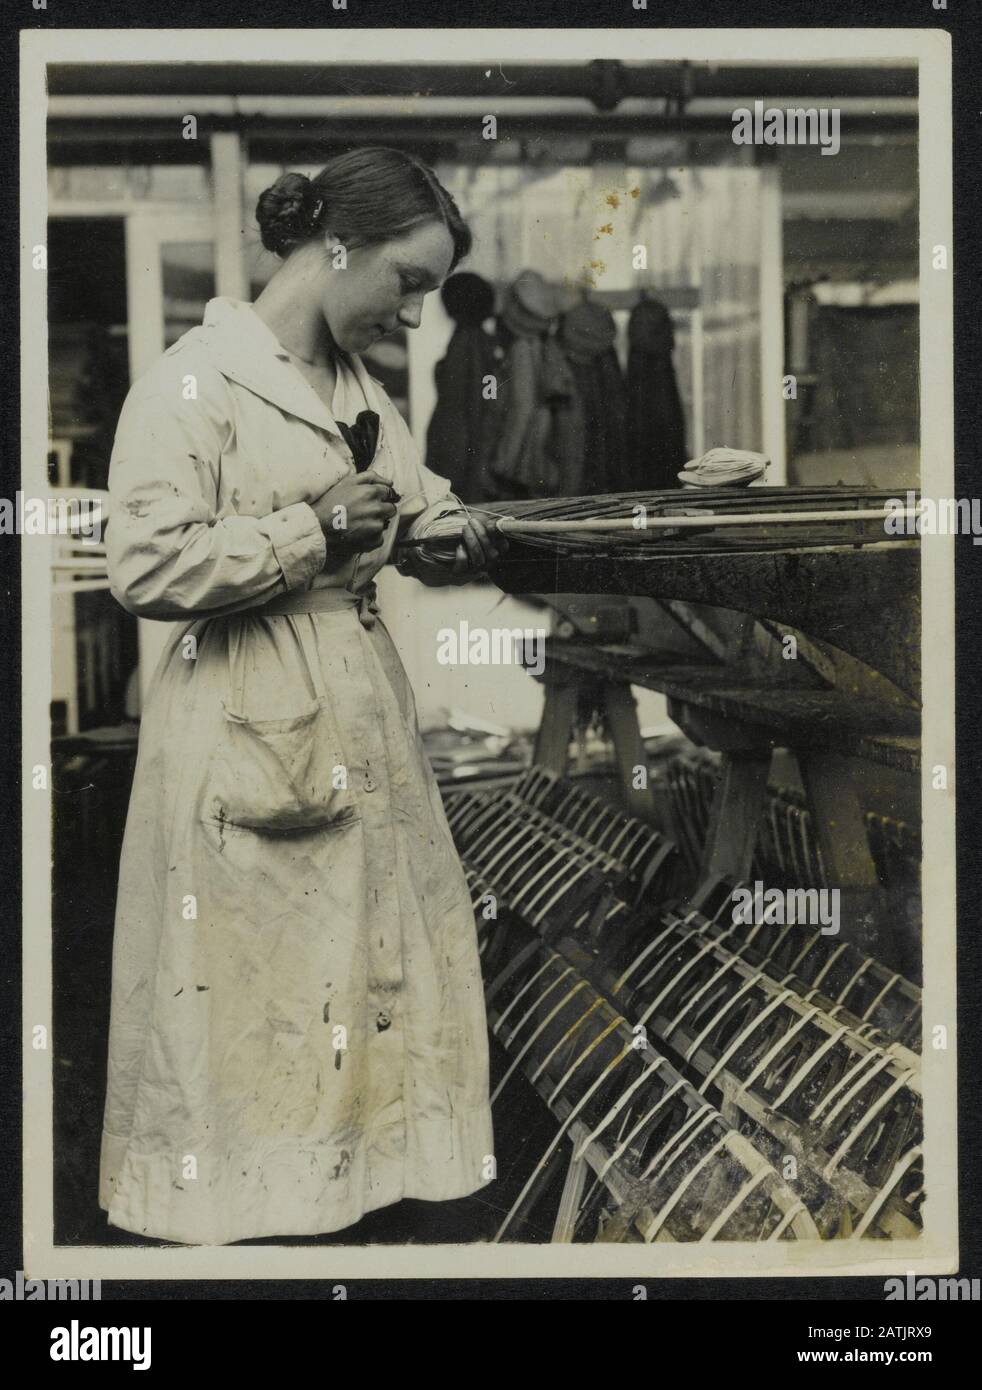 Womens Work Description: Airplane factory near Birmingham. British airplane women workers in the Midlands. Card splicing joints on frame or planes Annotation: Women's Work. Workers at an aircraft factory in Birmingham in the Midlands Date: {1914-1918} Location: Birmingham, UK Keywords: WWI, war industry, aircraft manufacturers, female labor Stock Photo